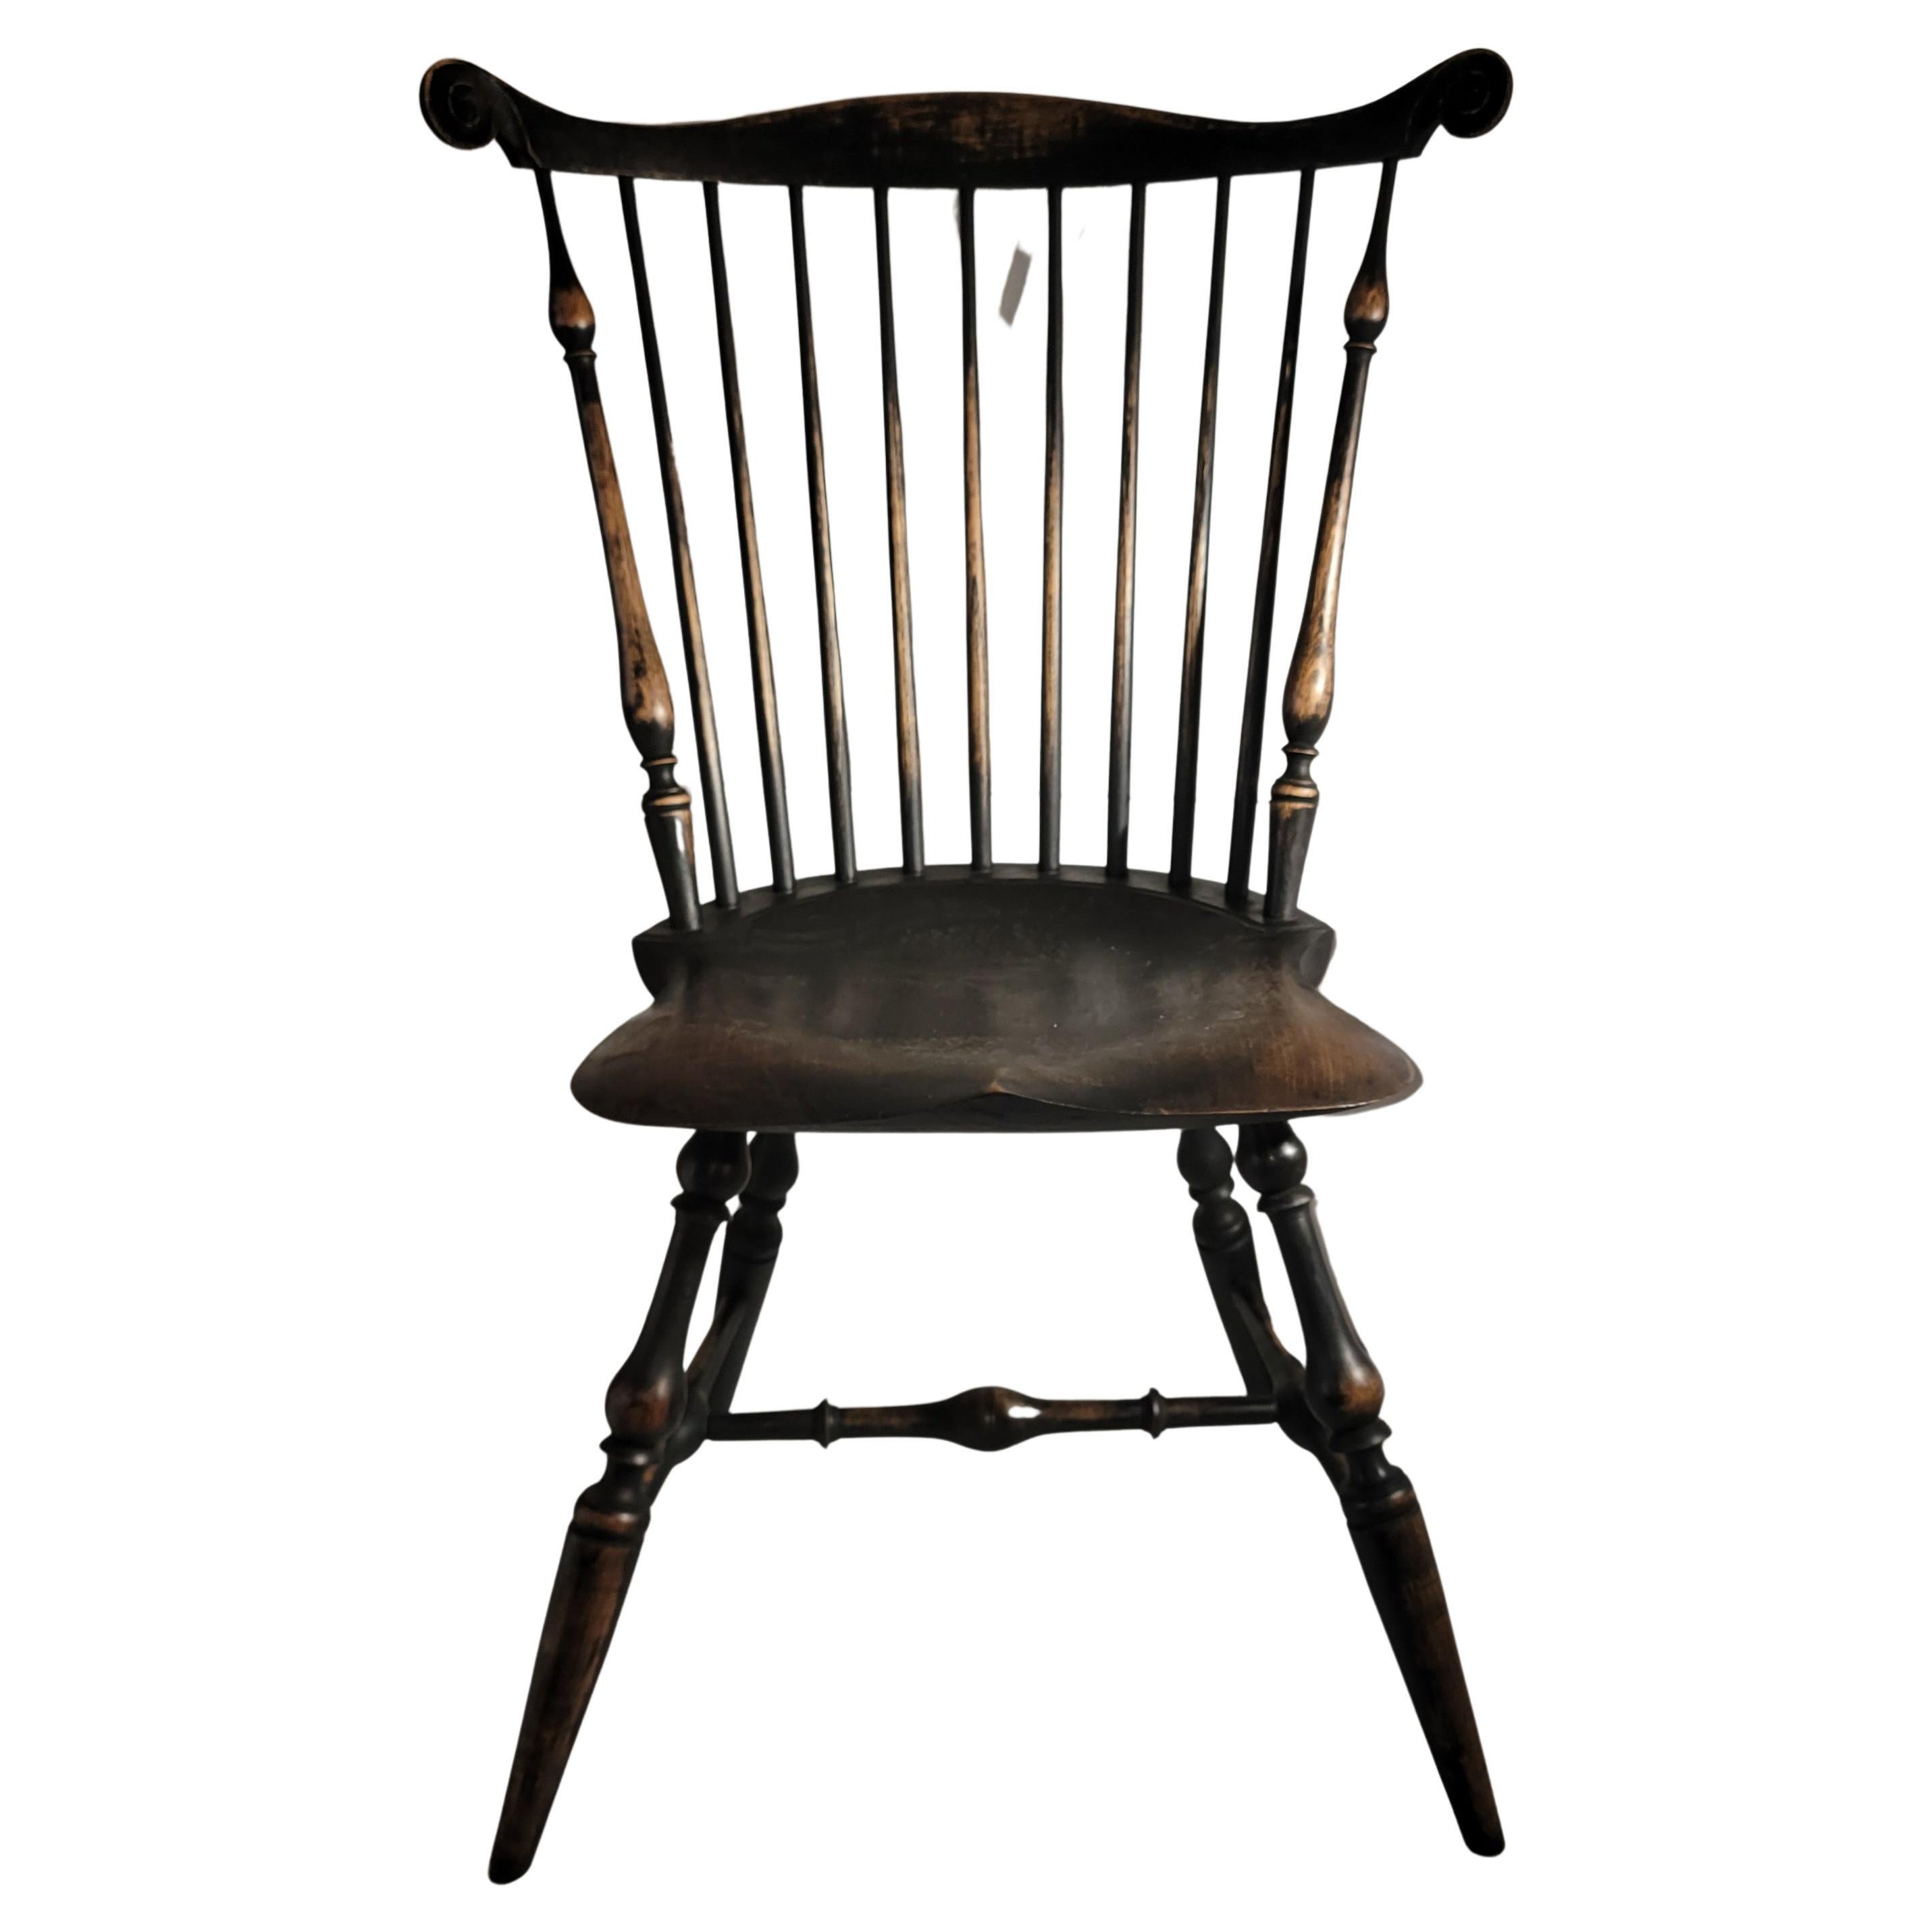 Hand-Painted 19th Century Black Painted Butterfly Windsor Chairs